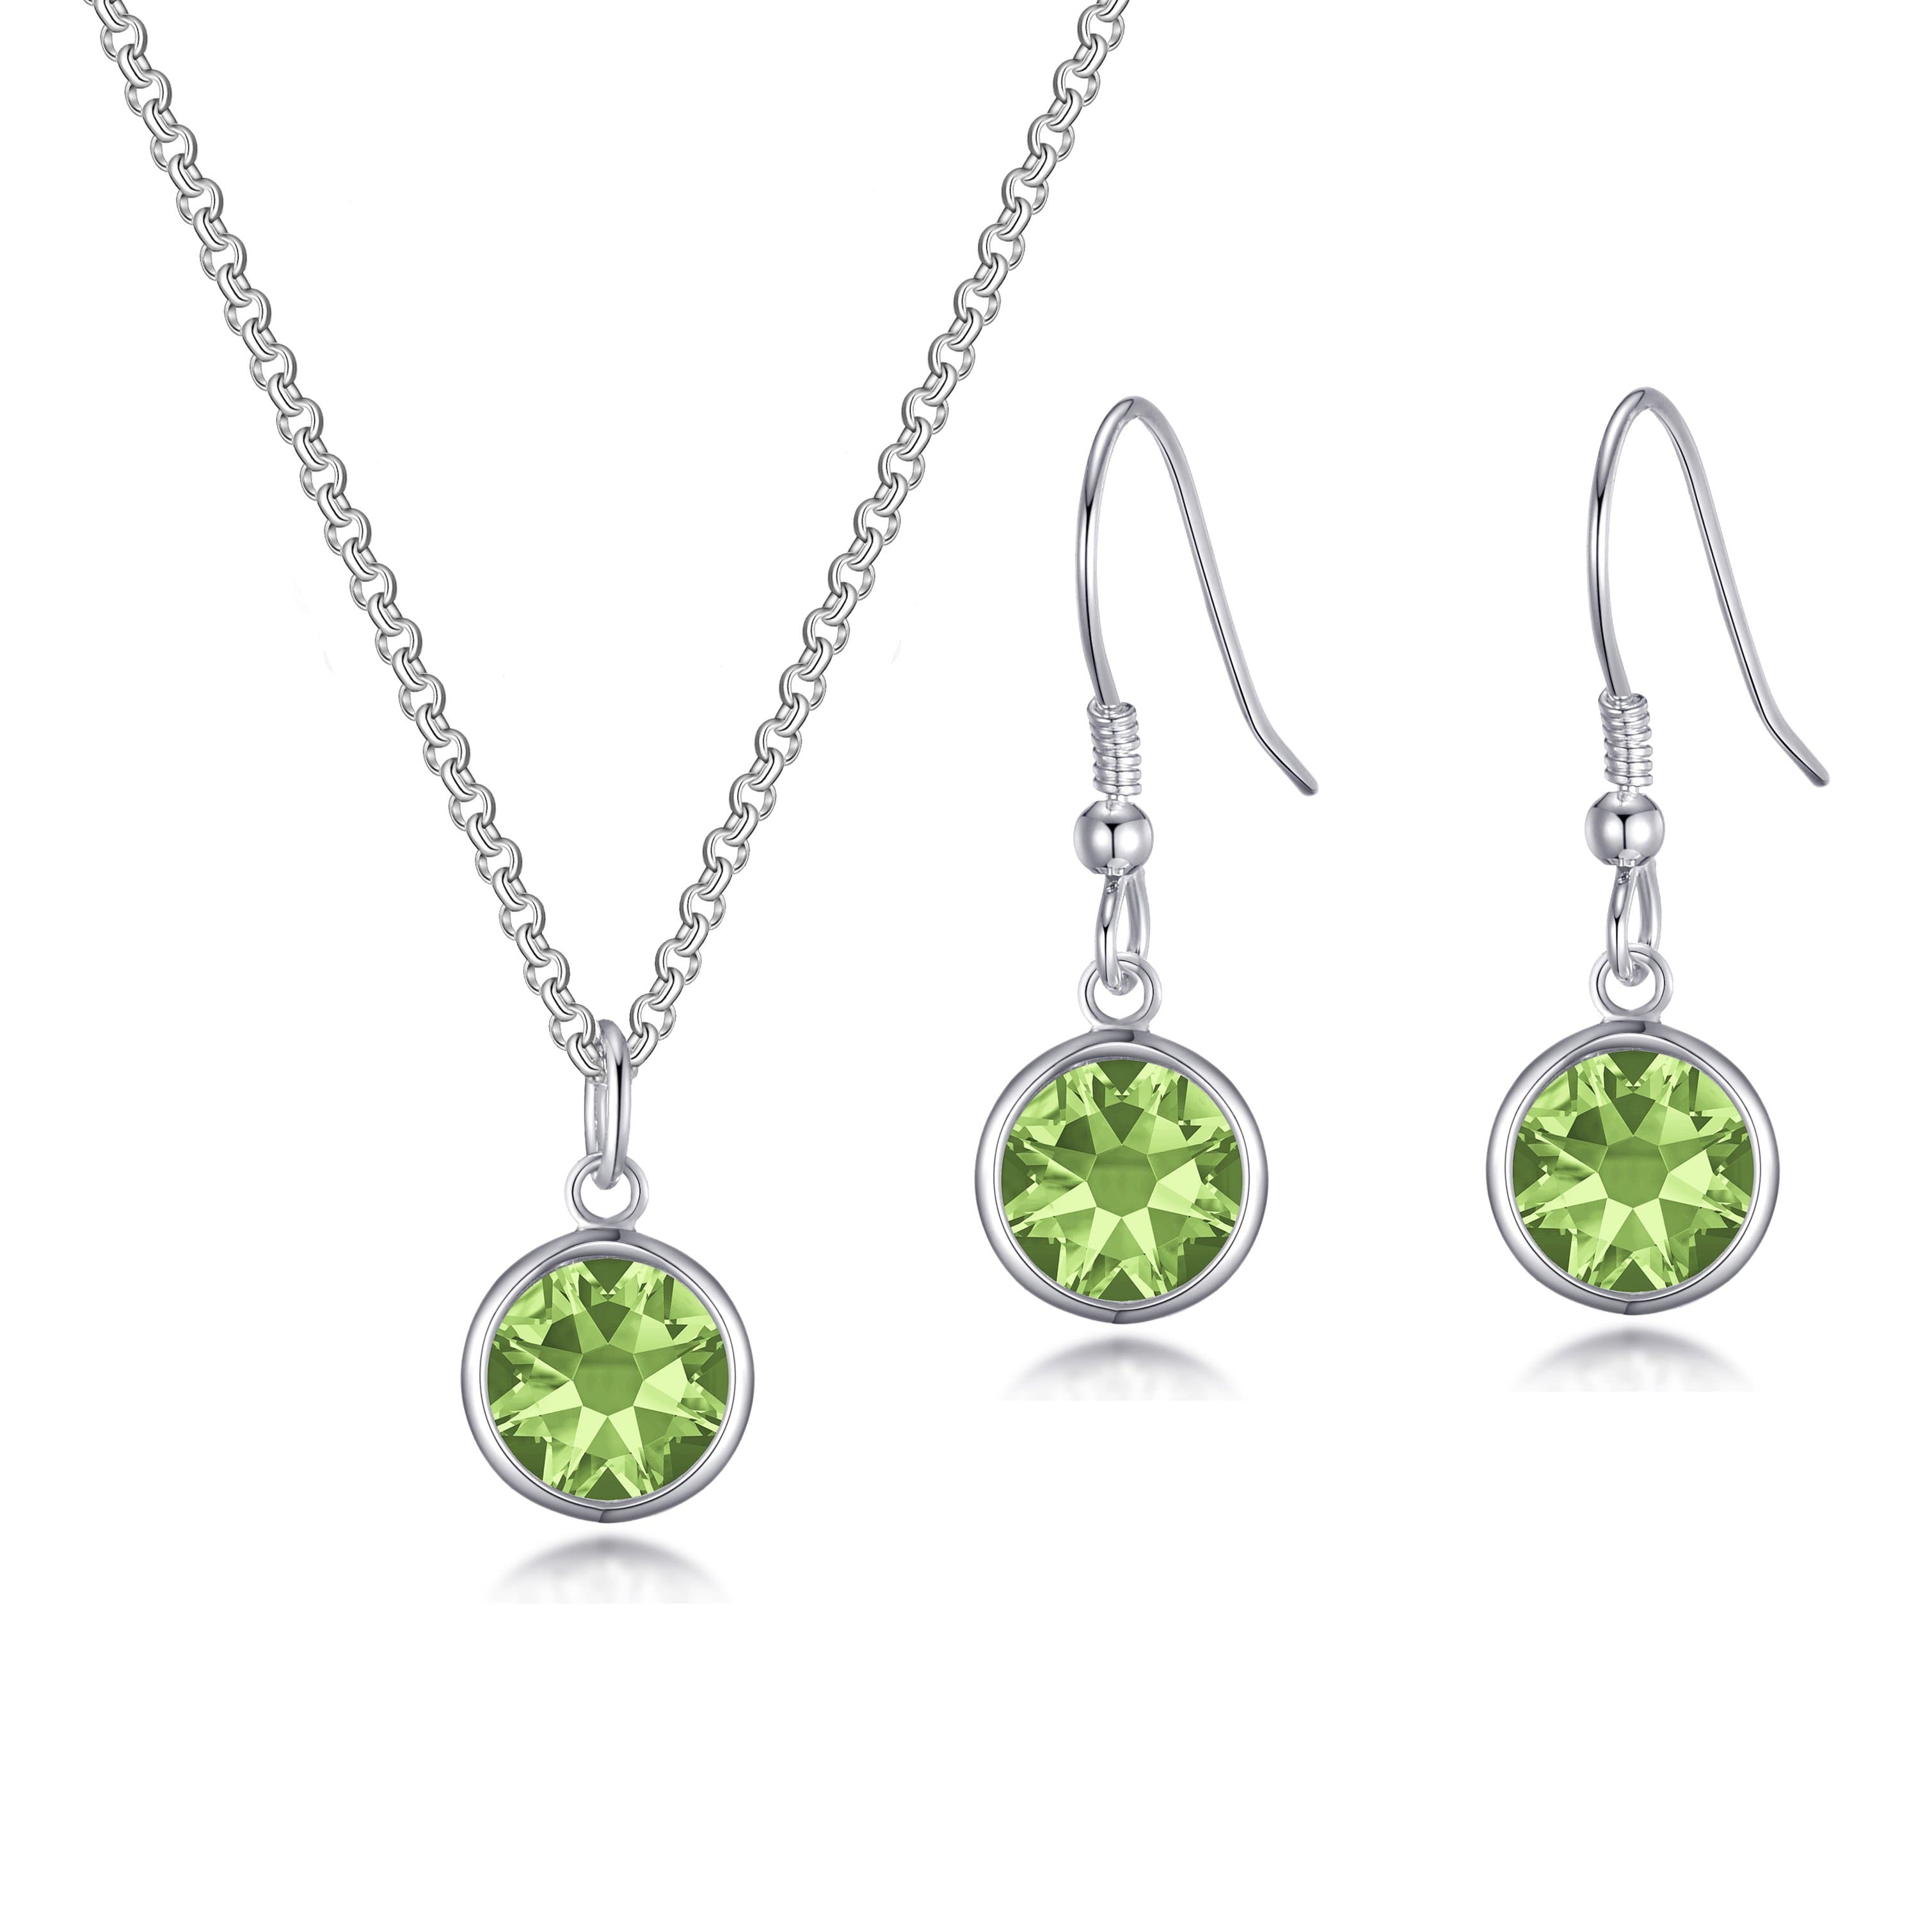 August (Peridot) Birthstone Necklace & Drop Earrings Set Created with Zircondia® Crystals